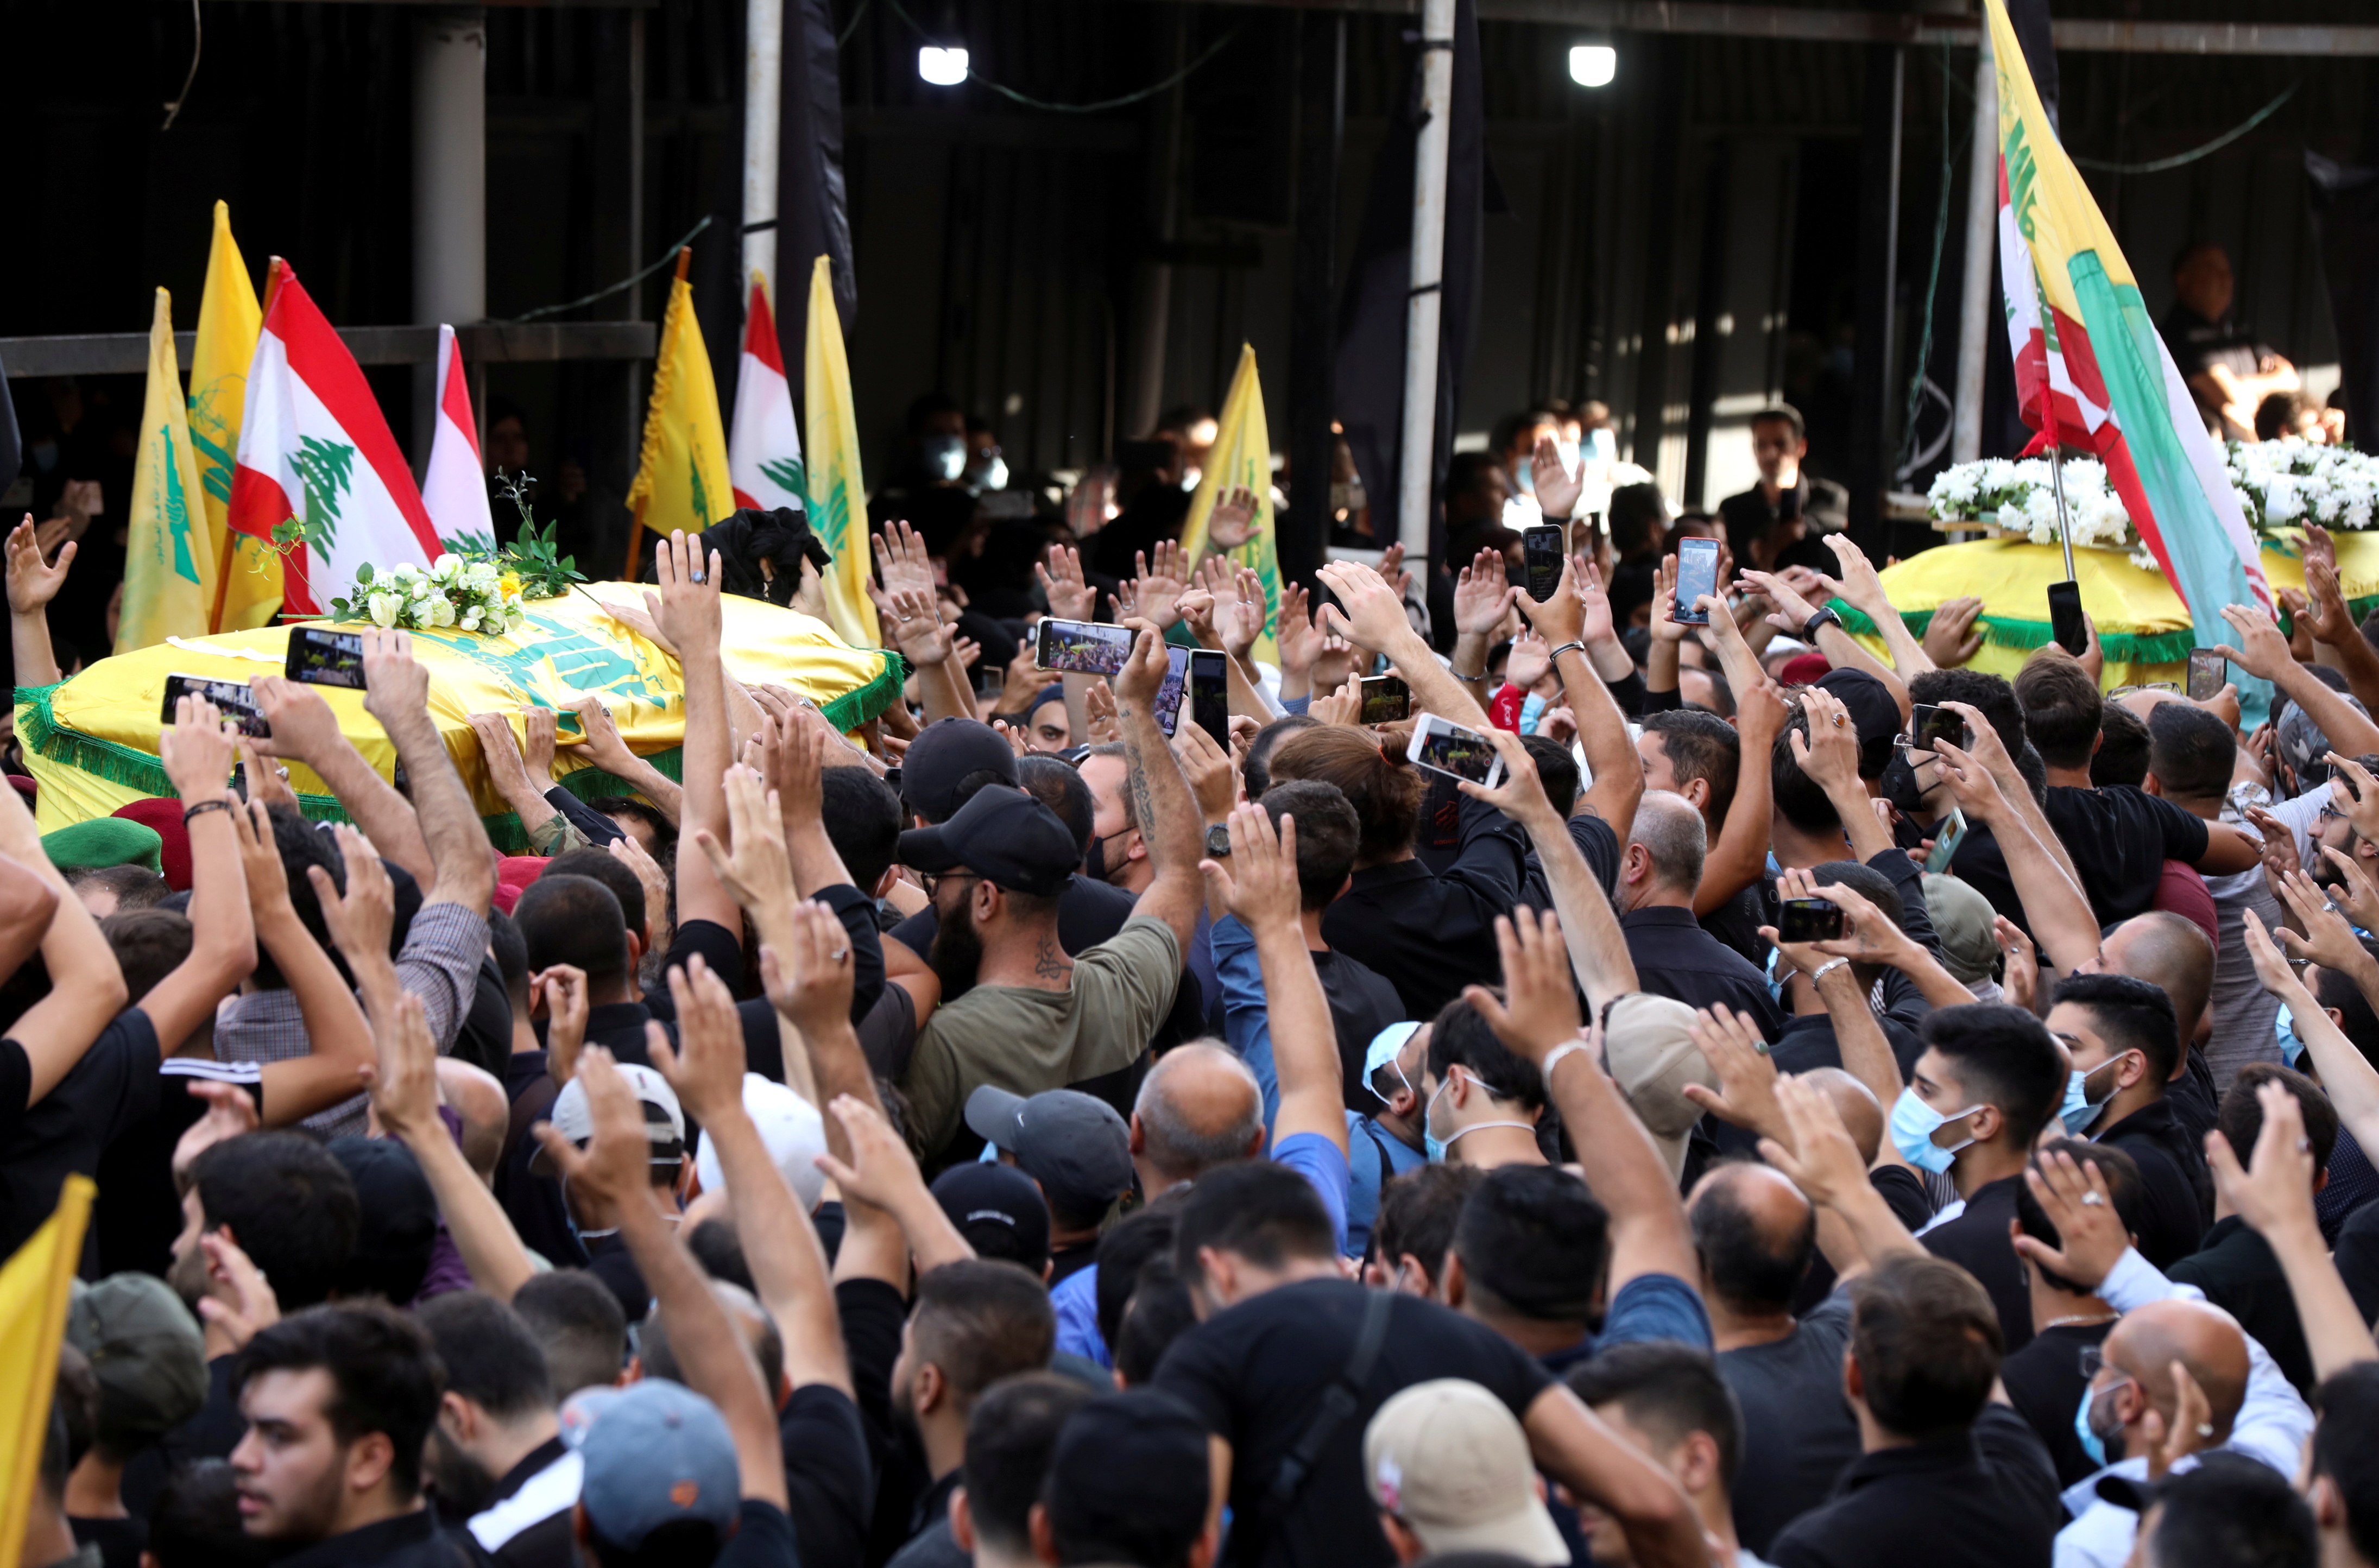 Funeral of people killed in violence in Beirut on Thursday